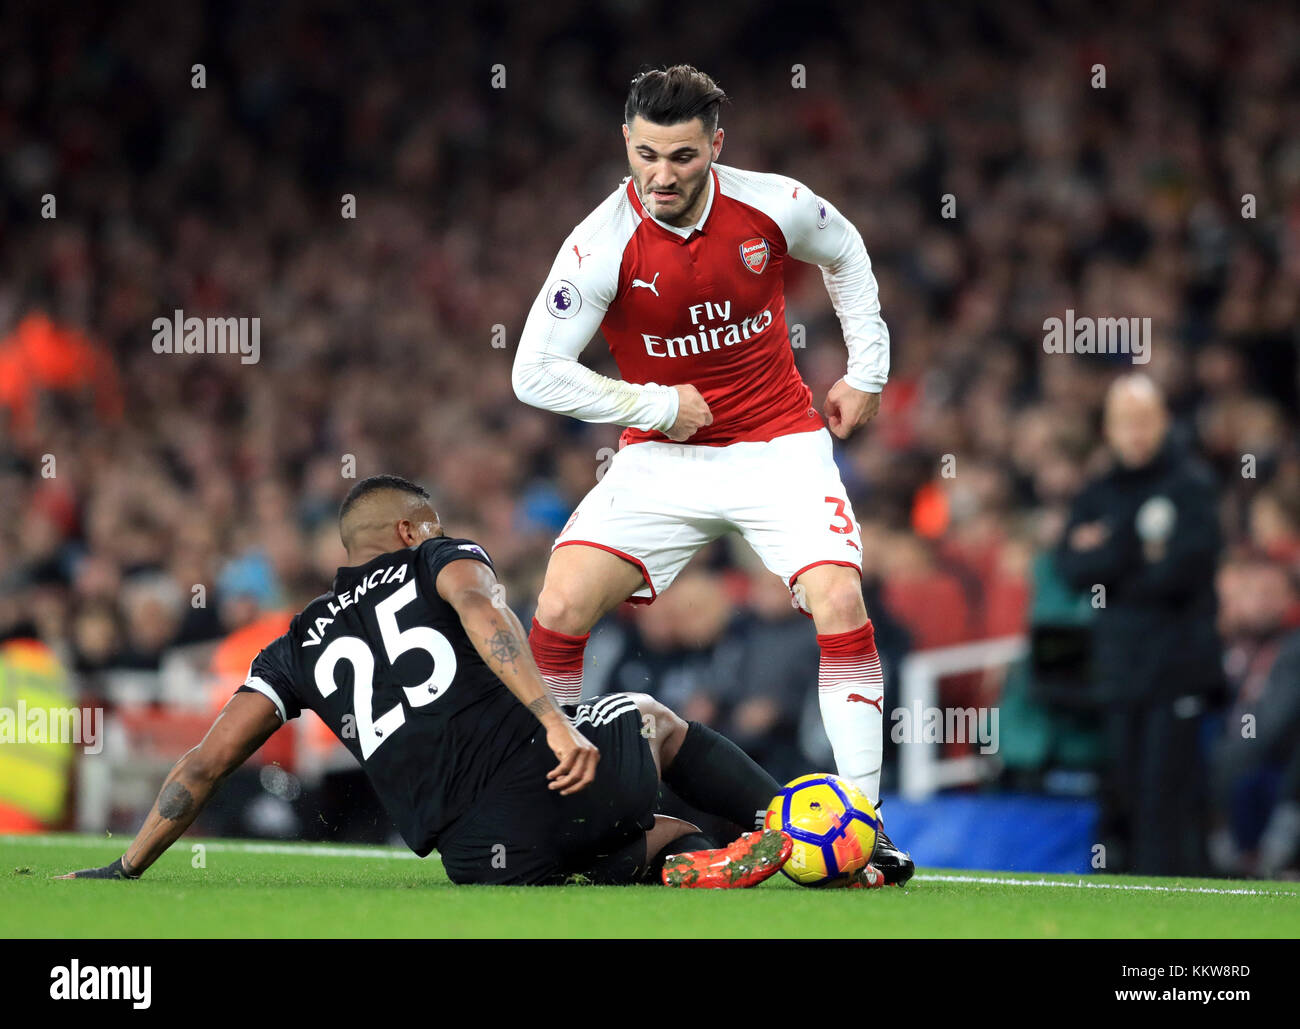 Manchester United's Antonio Valencia (left) and Arsenal's Sead Kolasinac battle for the ball during the Premier League match at the Emirates Stadium, London. PRESS ASSOCIATION Photo Picture date: Saturday December 2, 2017. See PA story SOCCER Arsenal. Photo credit should read: Adam Davy/PA Wire. RESTRICTIONS: EDITORIAL USE ONLY No use with unauthorised audio, video, data, fixture lists, club/league logos or 'live' services. Online in-match use limited to 75 images, no video emulation. No use in betting, games or single club/league/player publications. Stock Photo